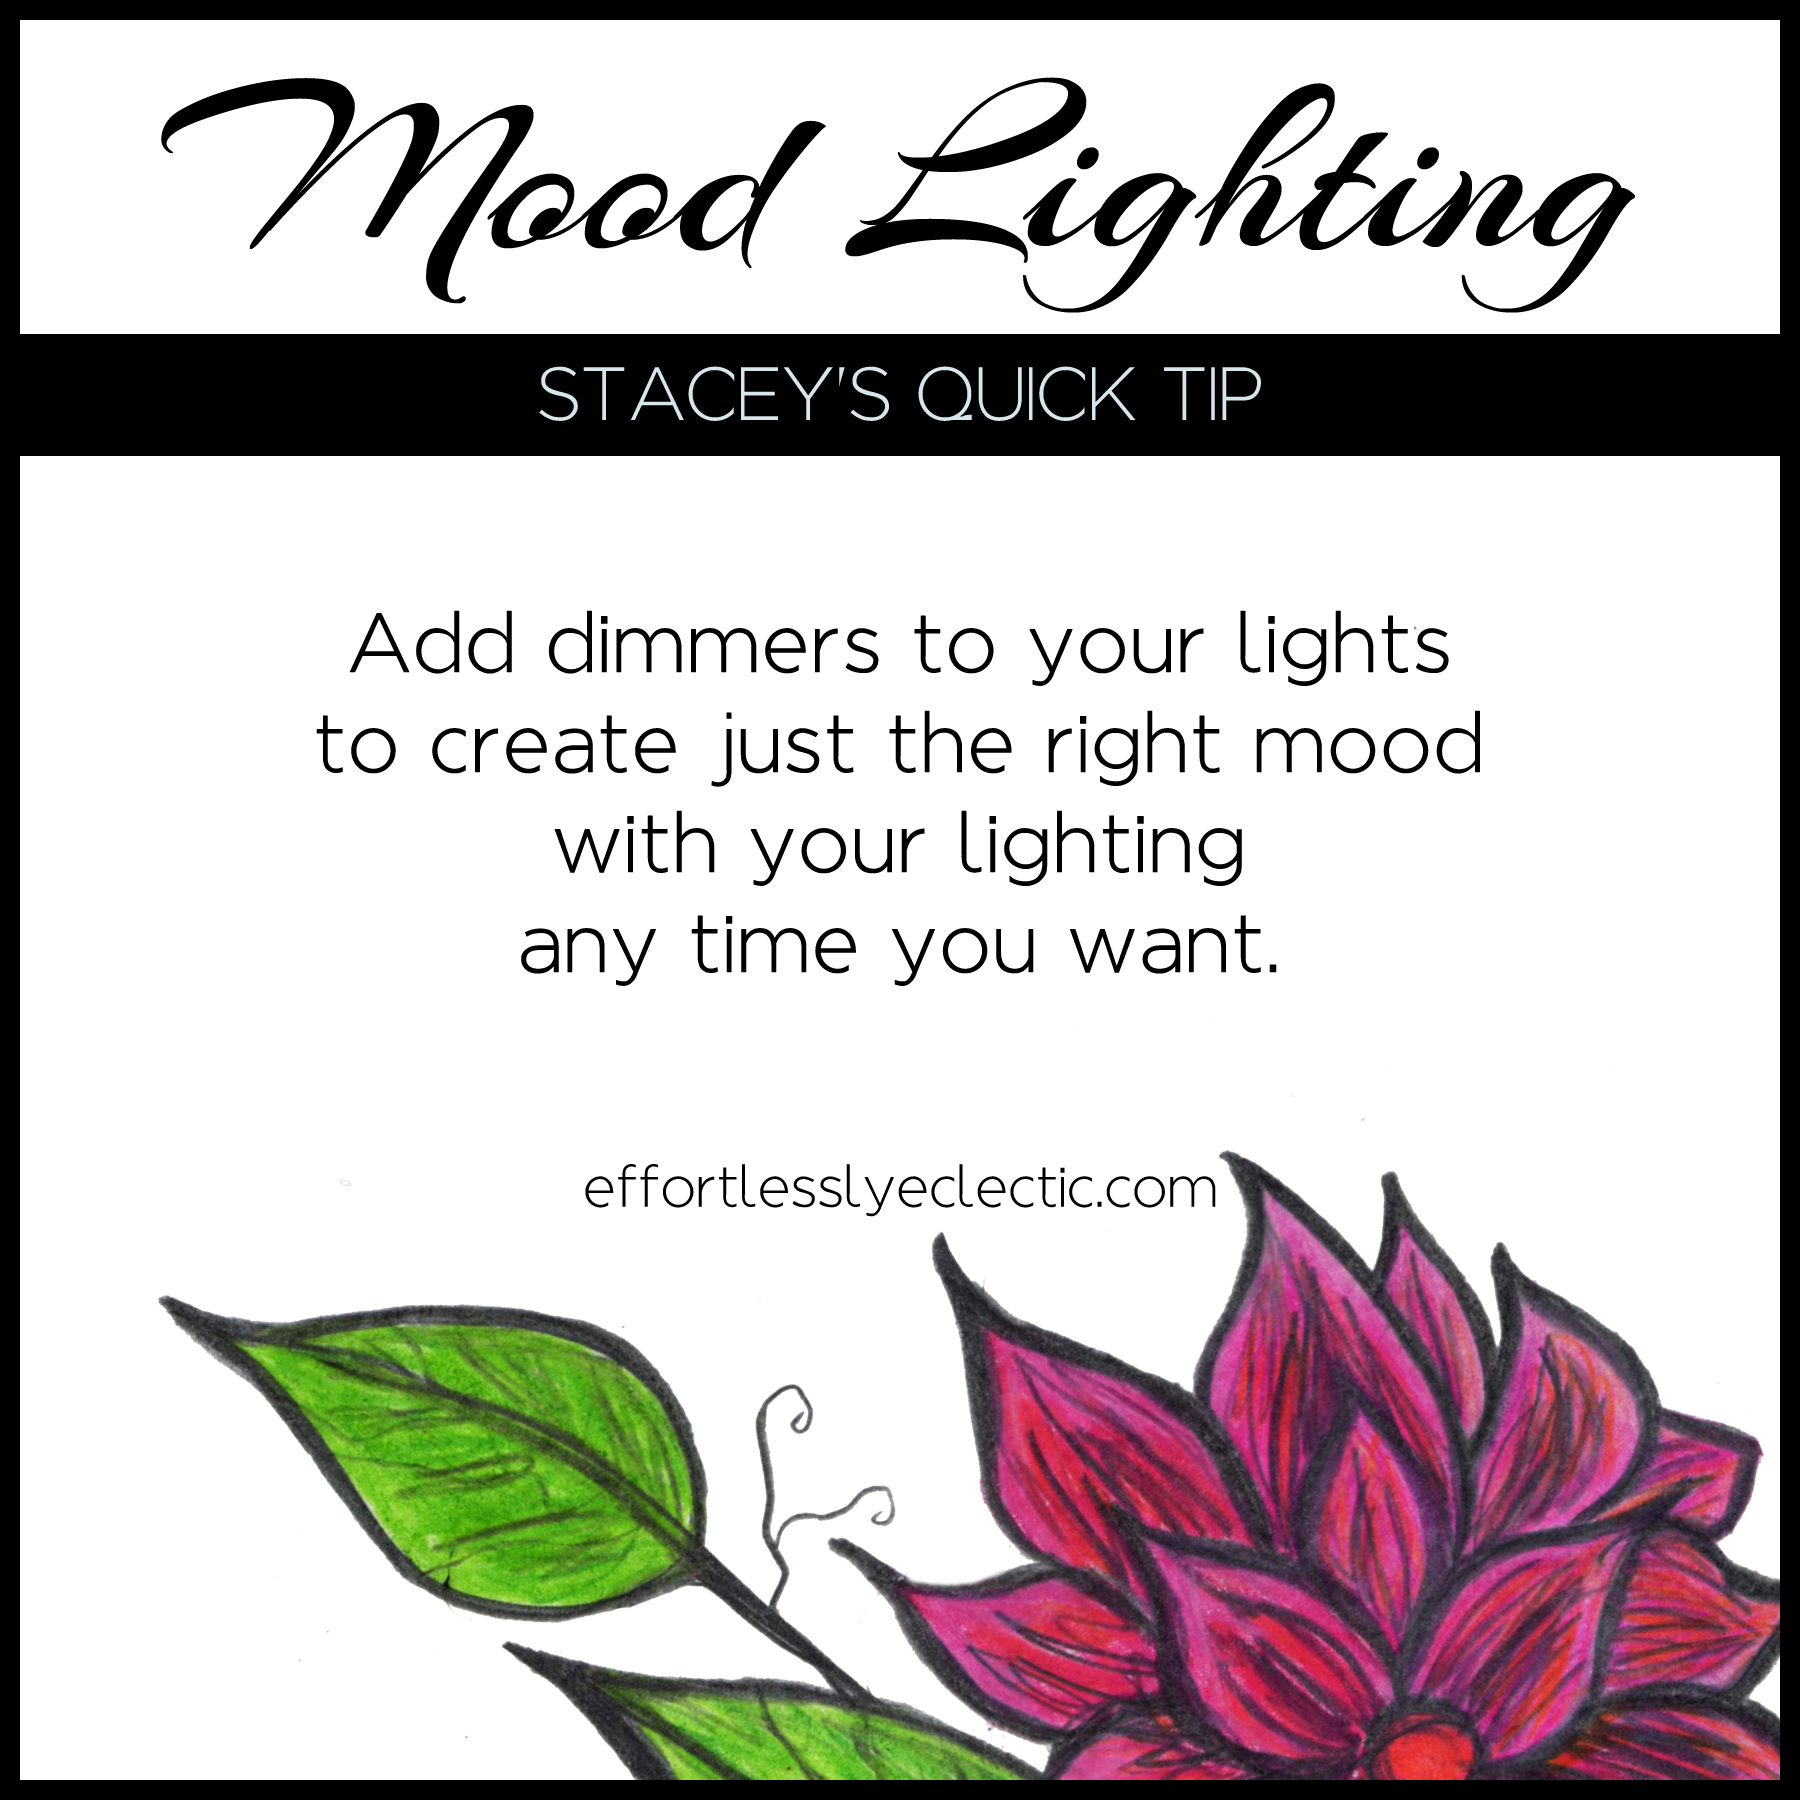 Mood Lighting - A home decor tip about how to create mood lighting